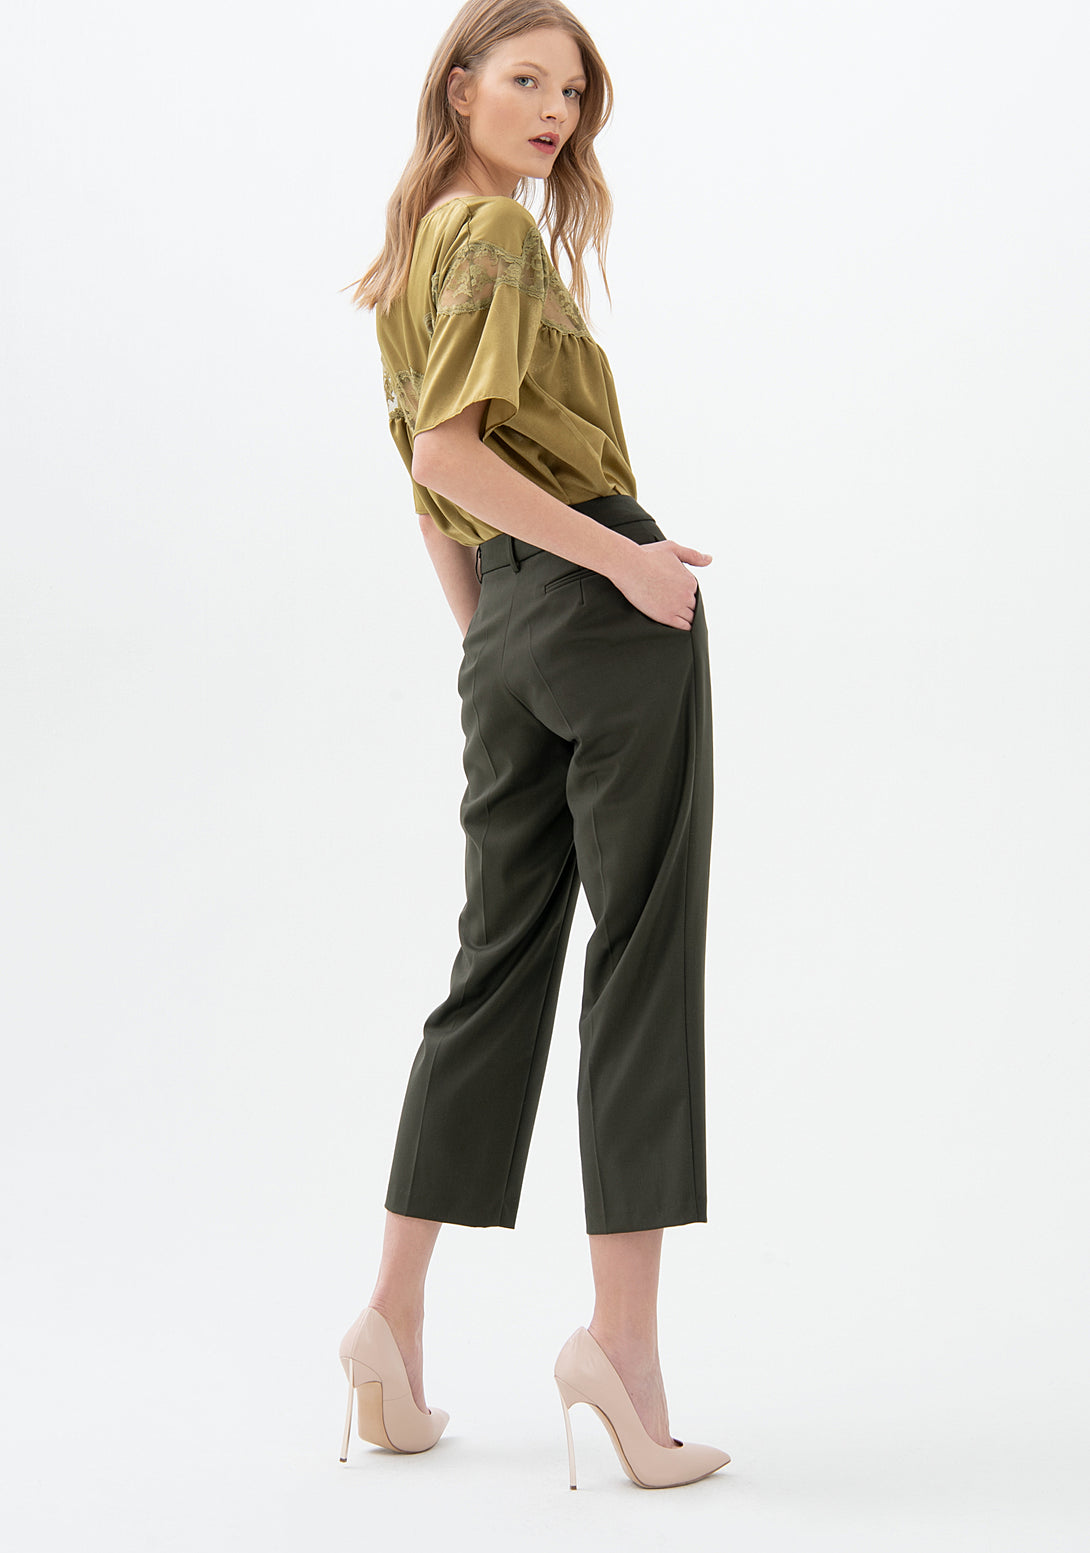 Pant straight line, cropped, made in technical fabric